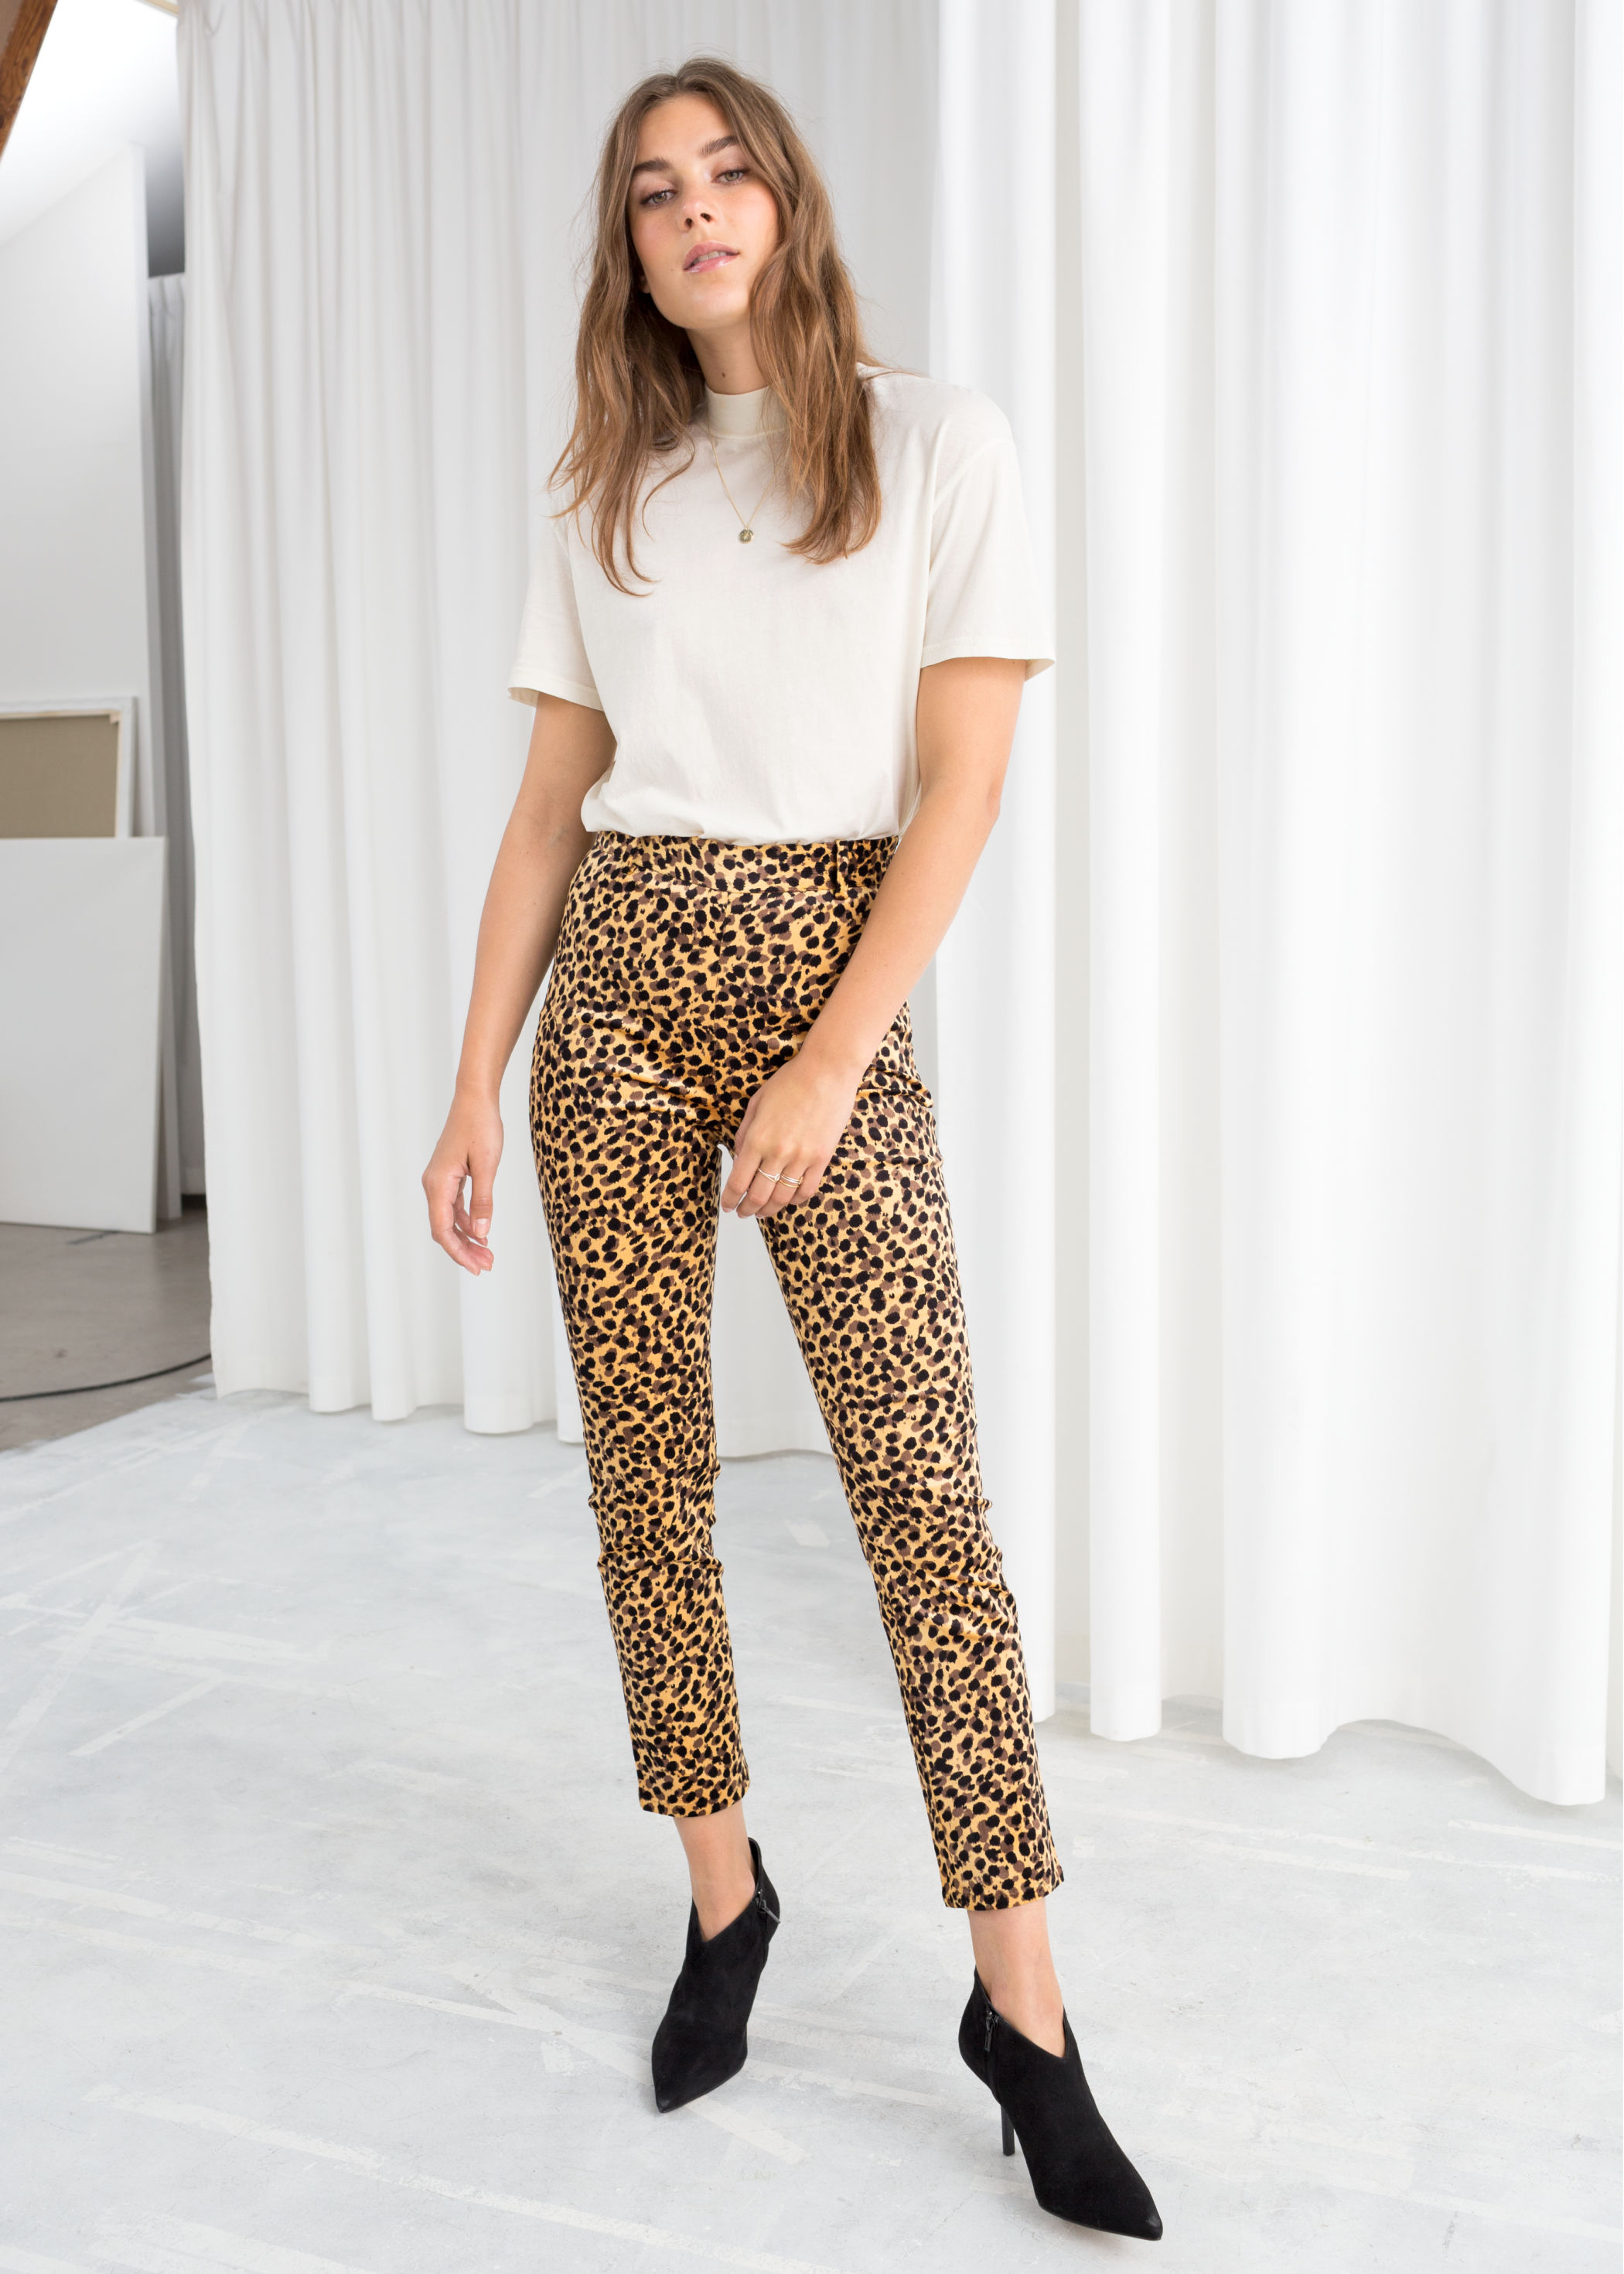 Pantaloni animalier And Other Stories a 79 euro